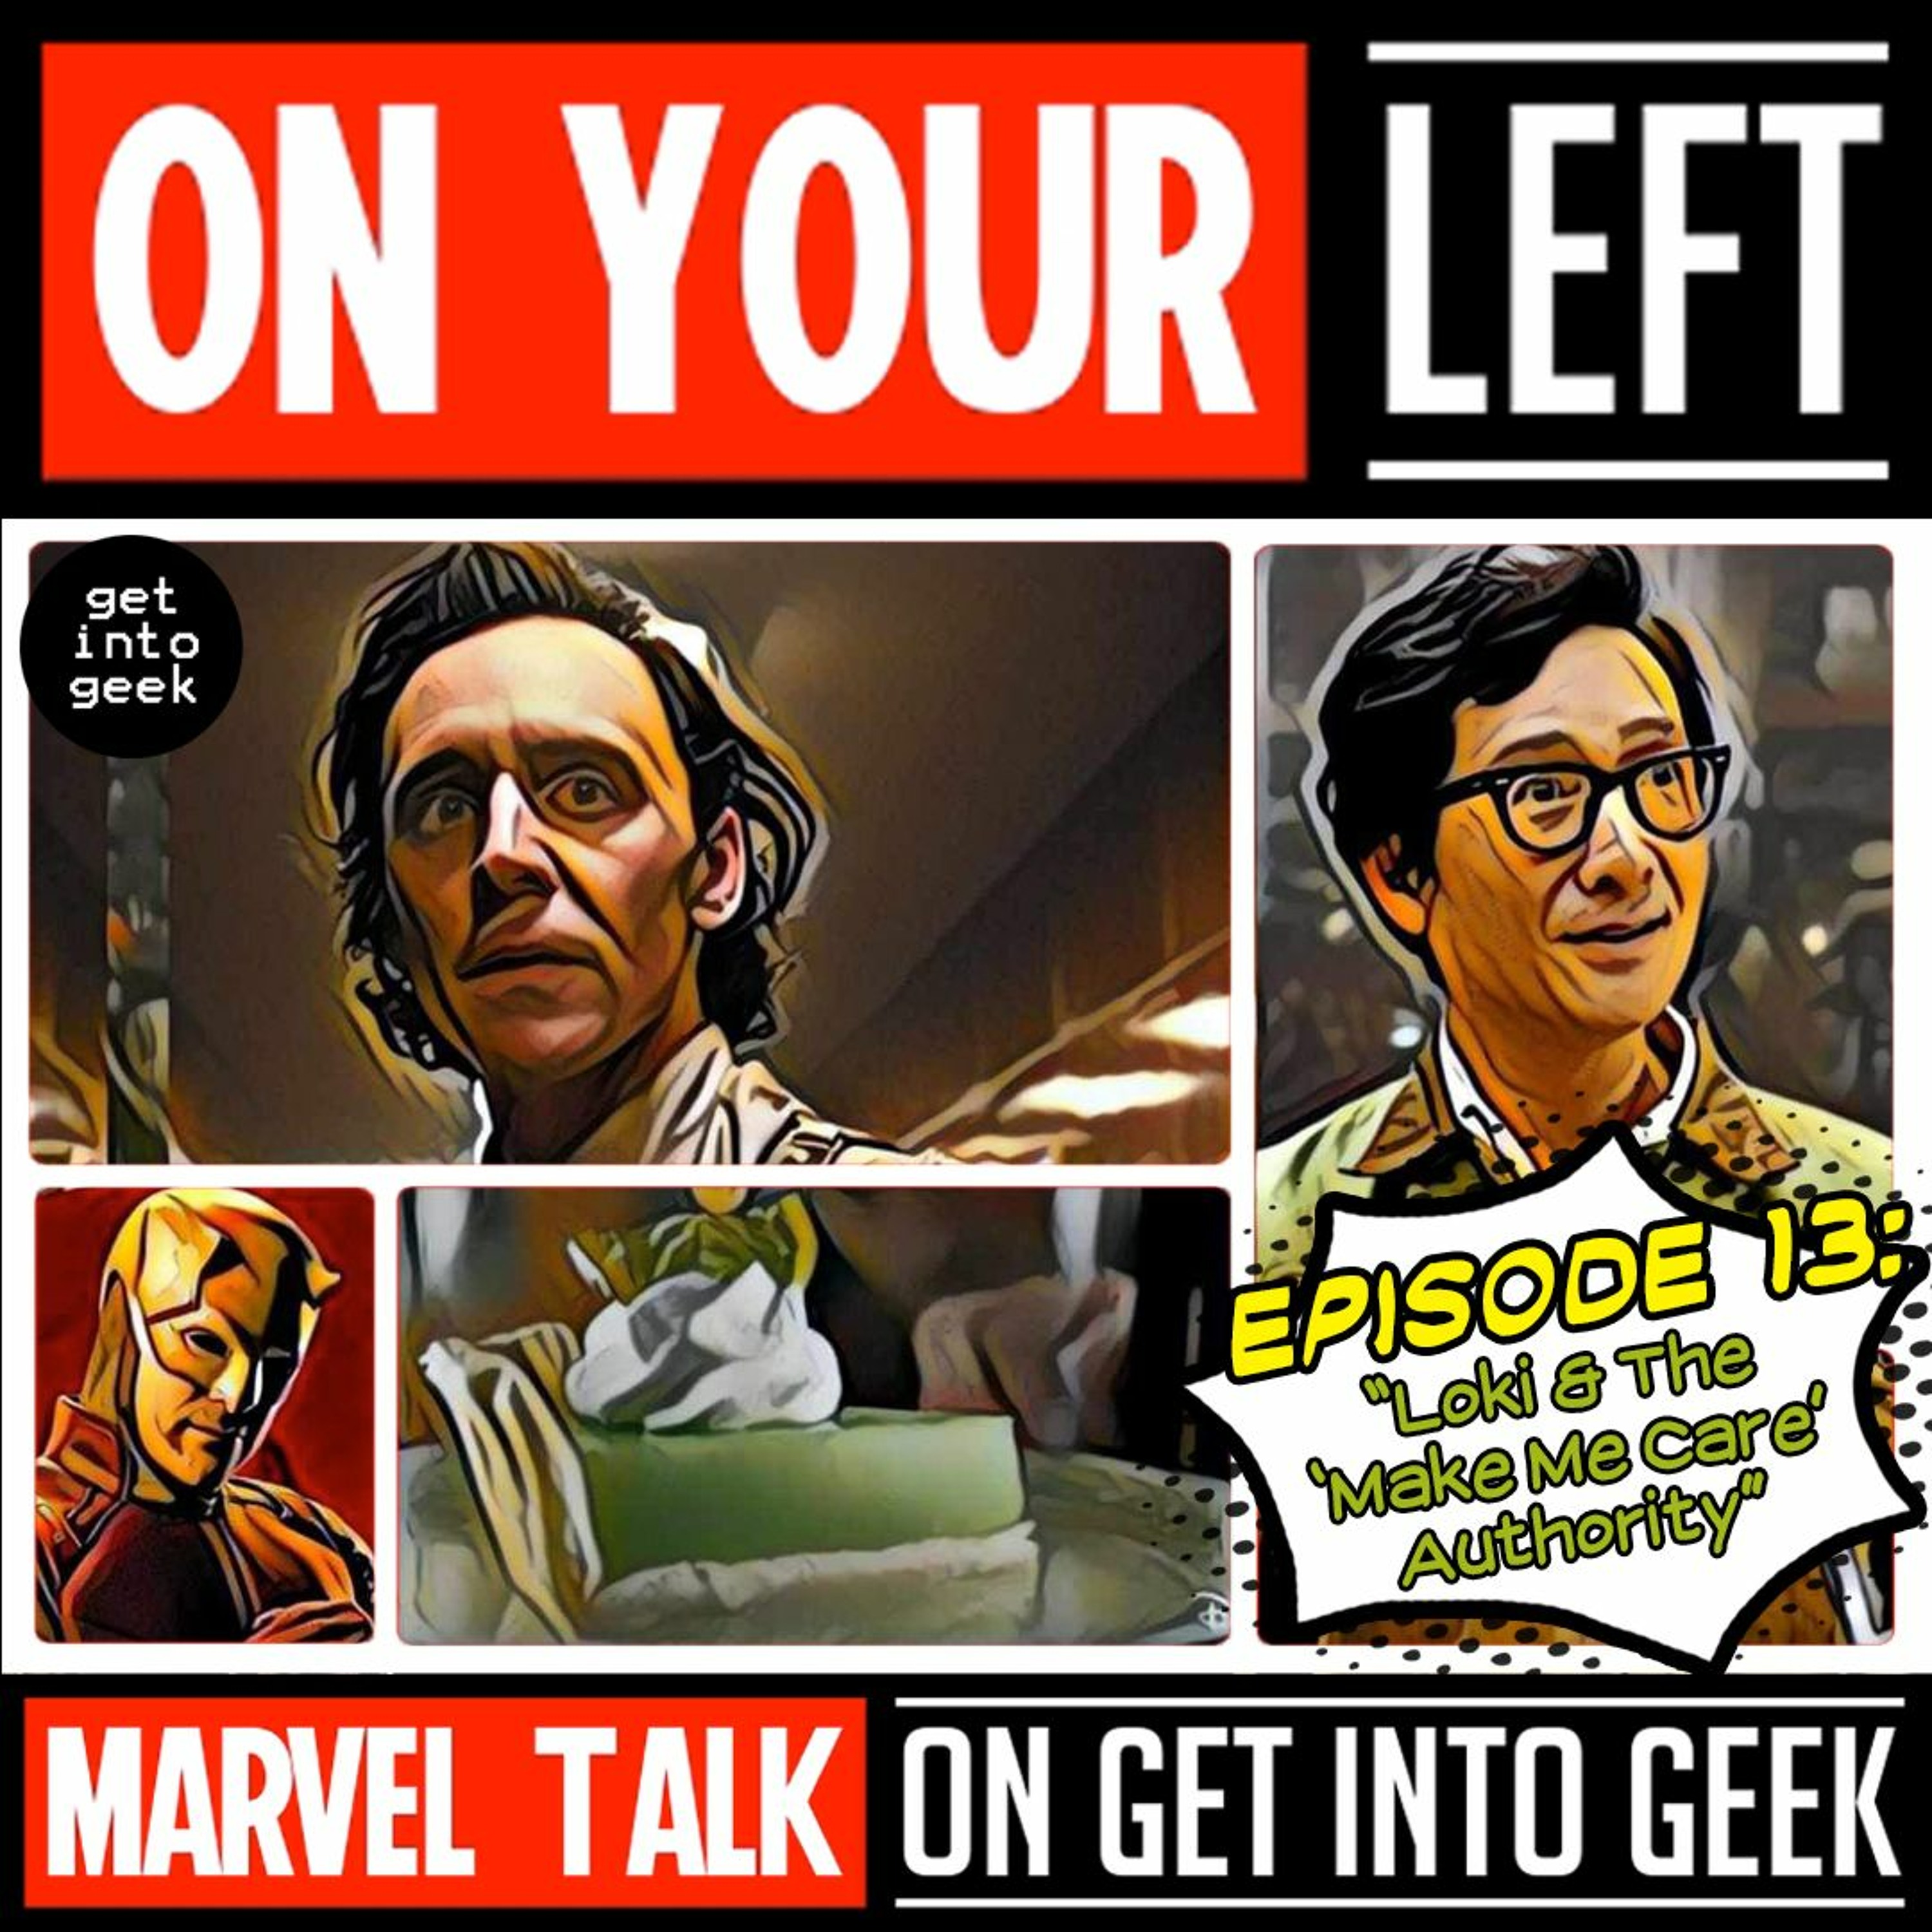 Loki & The ’Make Me Care’ Authority (On Your Left - Marvel Talk Episode 1.13